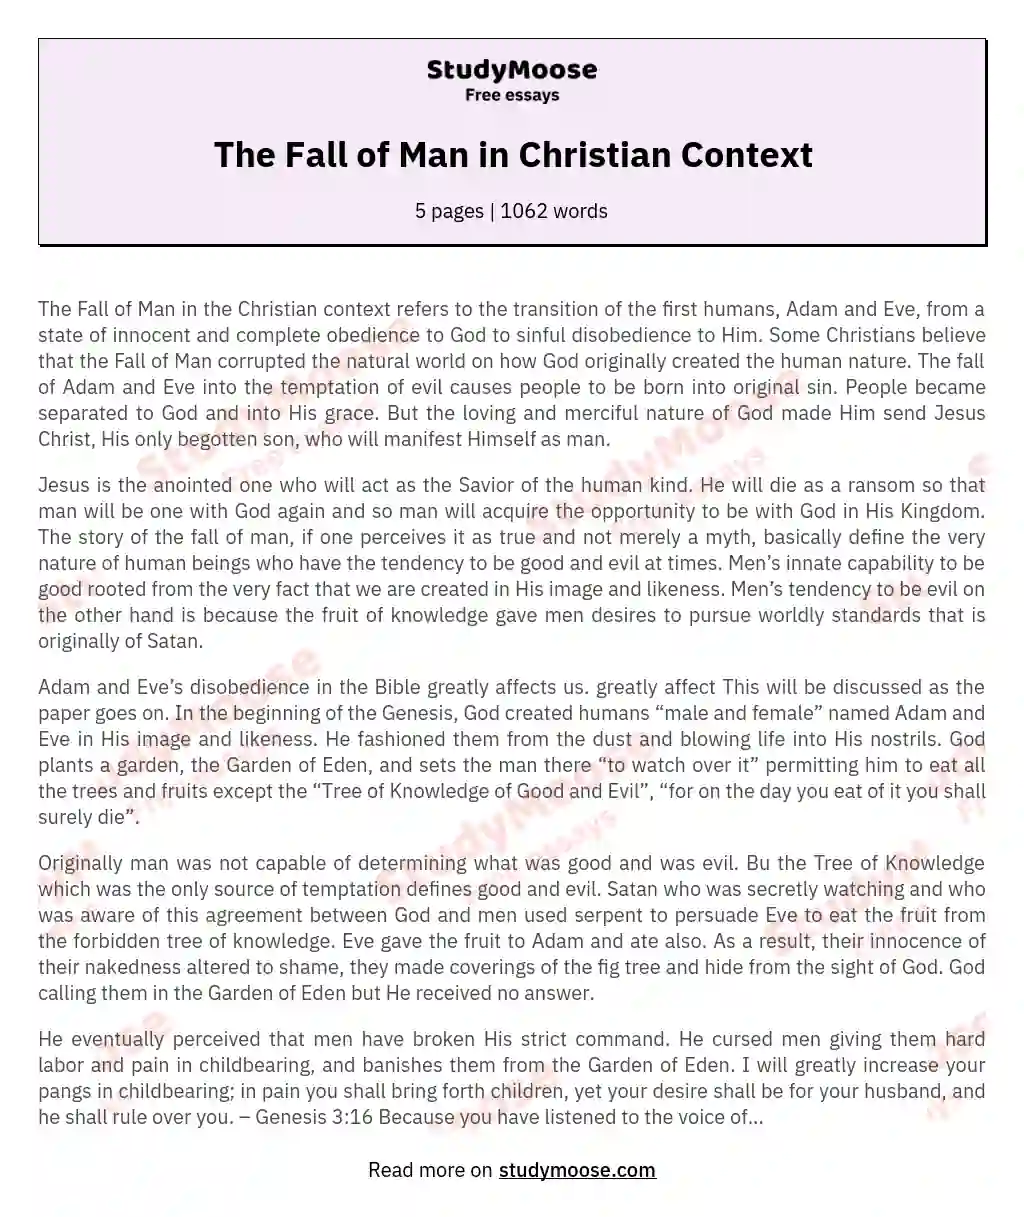 The Fall of Man in Christian Context essay